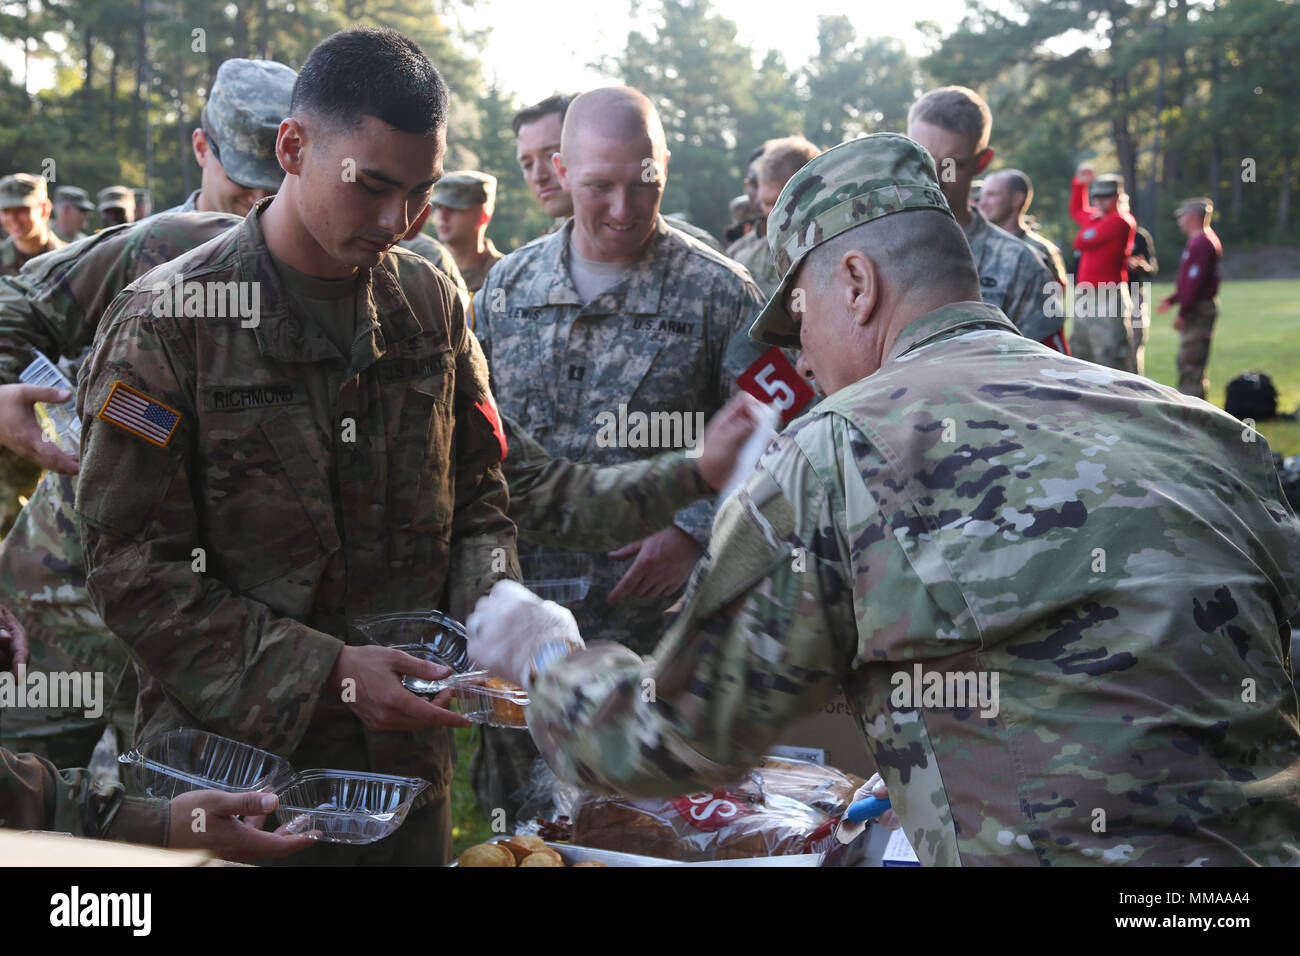 U.S. Army Sgt. Kevin Richmond, assigned to Martin Army Community Hospital, gets served a hot breakfast after the 2017 Best Medic Competition at Fort Bragg, N.C., Sept. 20, 2017. The competition tested the physical and mental toughness, as well as the technical competence, of each medic to identify the team moving forward to represent the region at the next level of the competition.  (U.S. Army photo by Pfc. Meleesa Gutierrez) Stock Photo